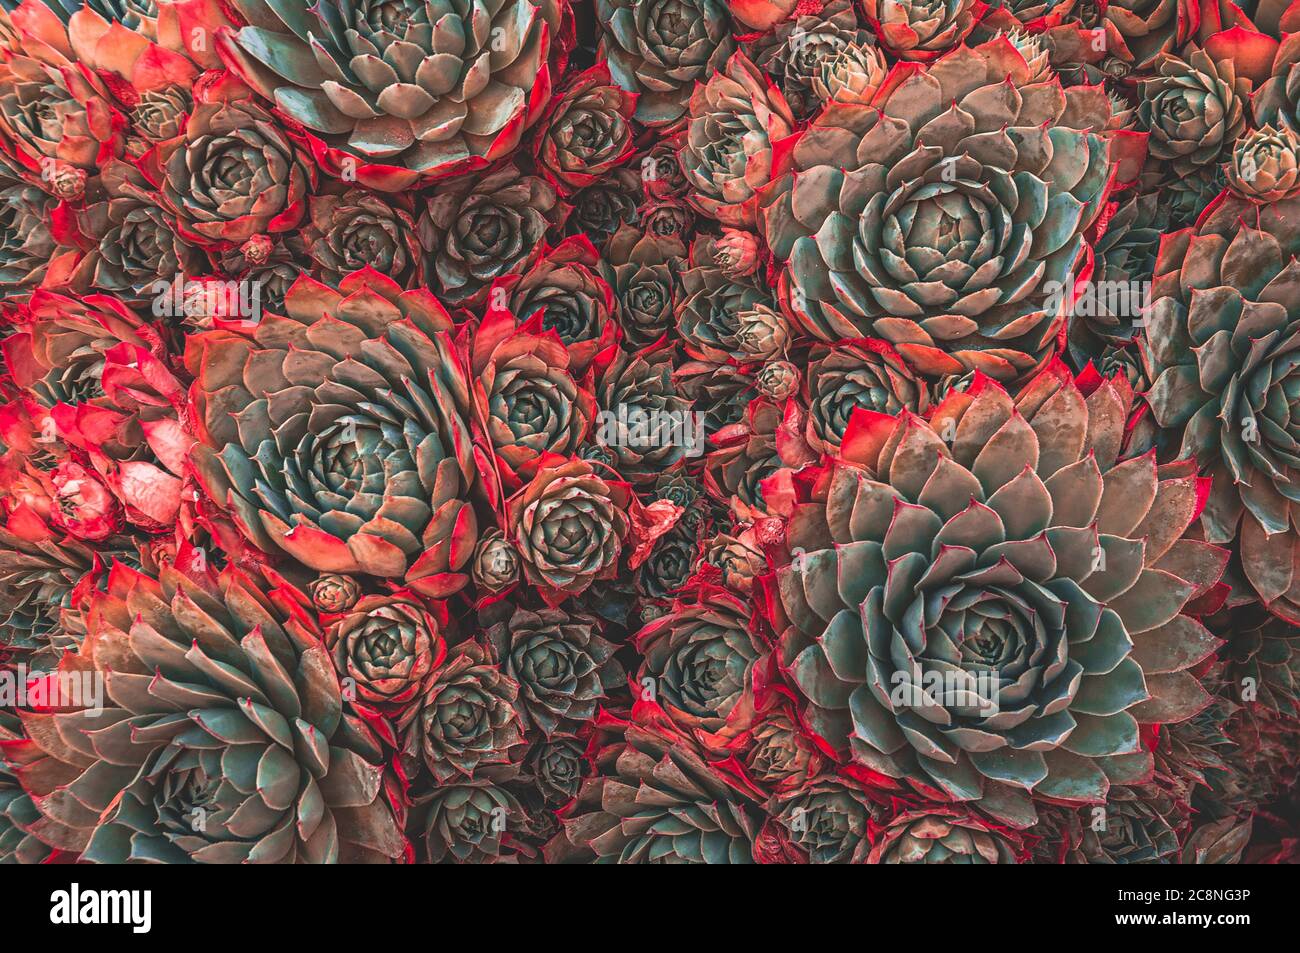 Abstract background wallpaper of many echeveria plant growing crammed together Stock Photo